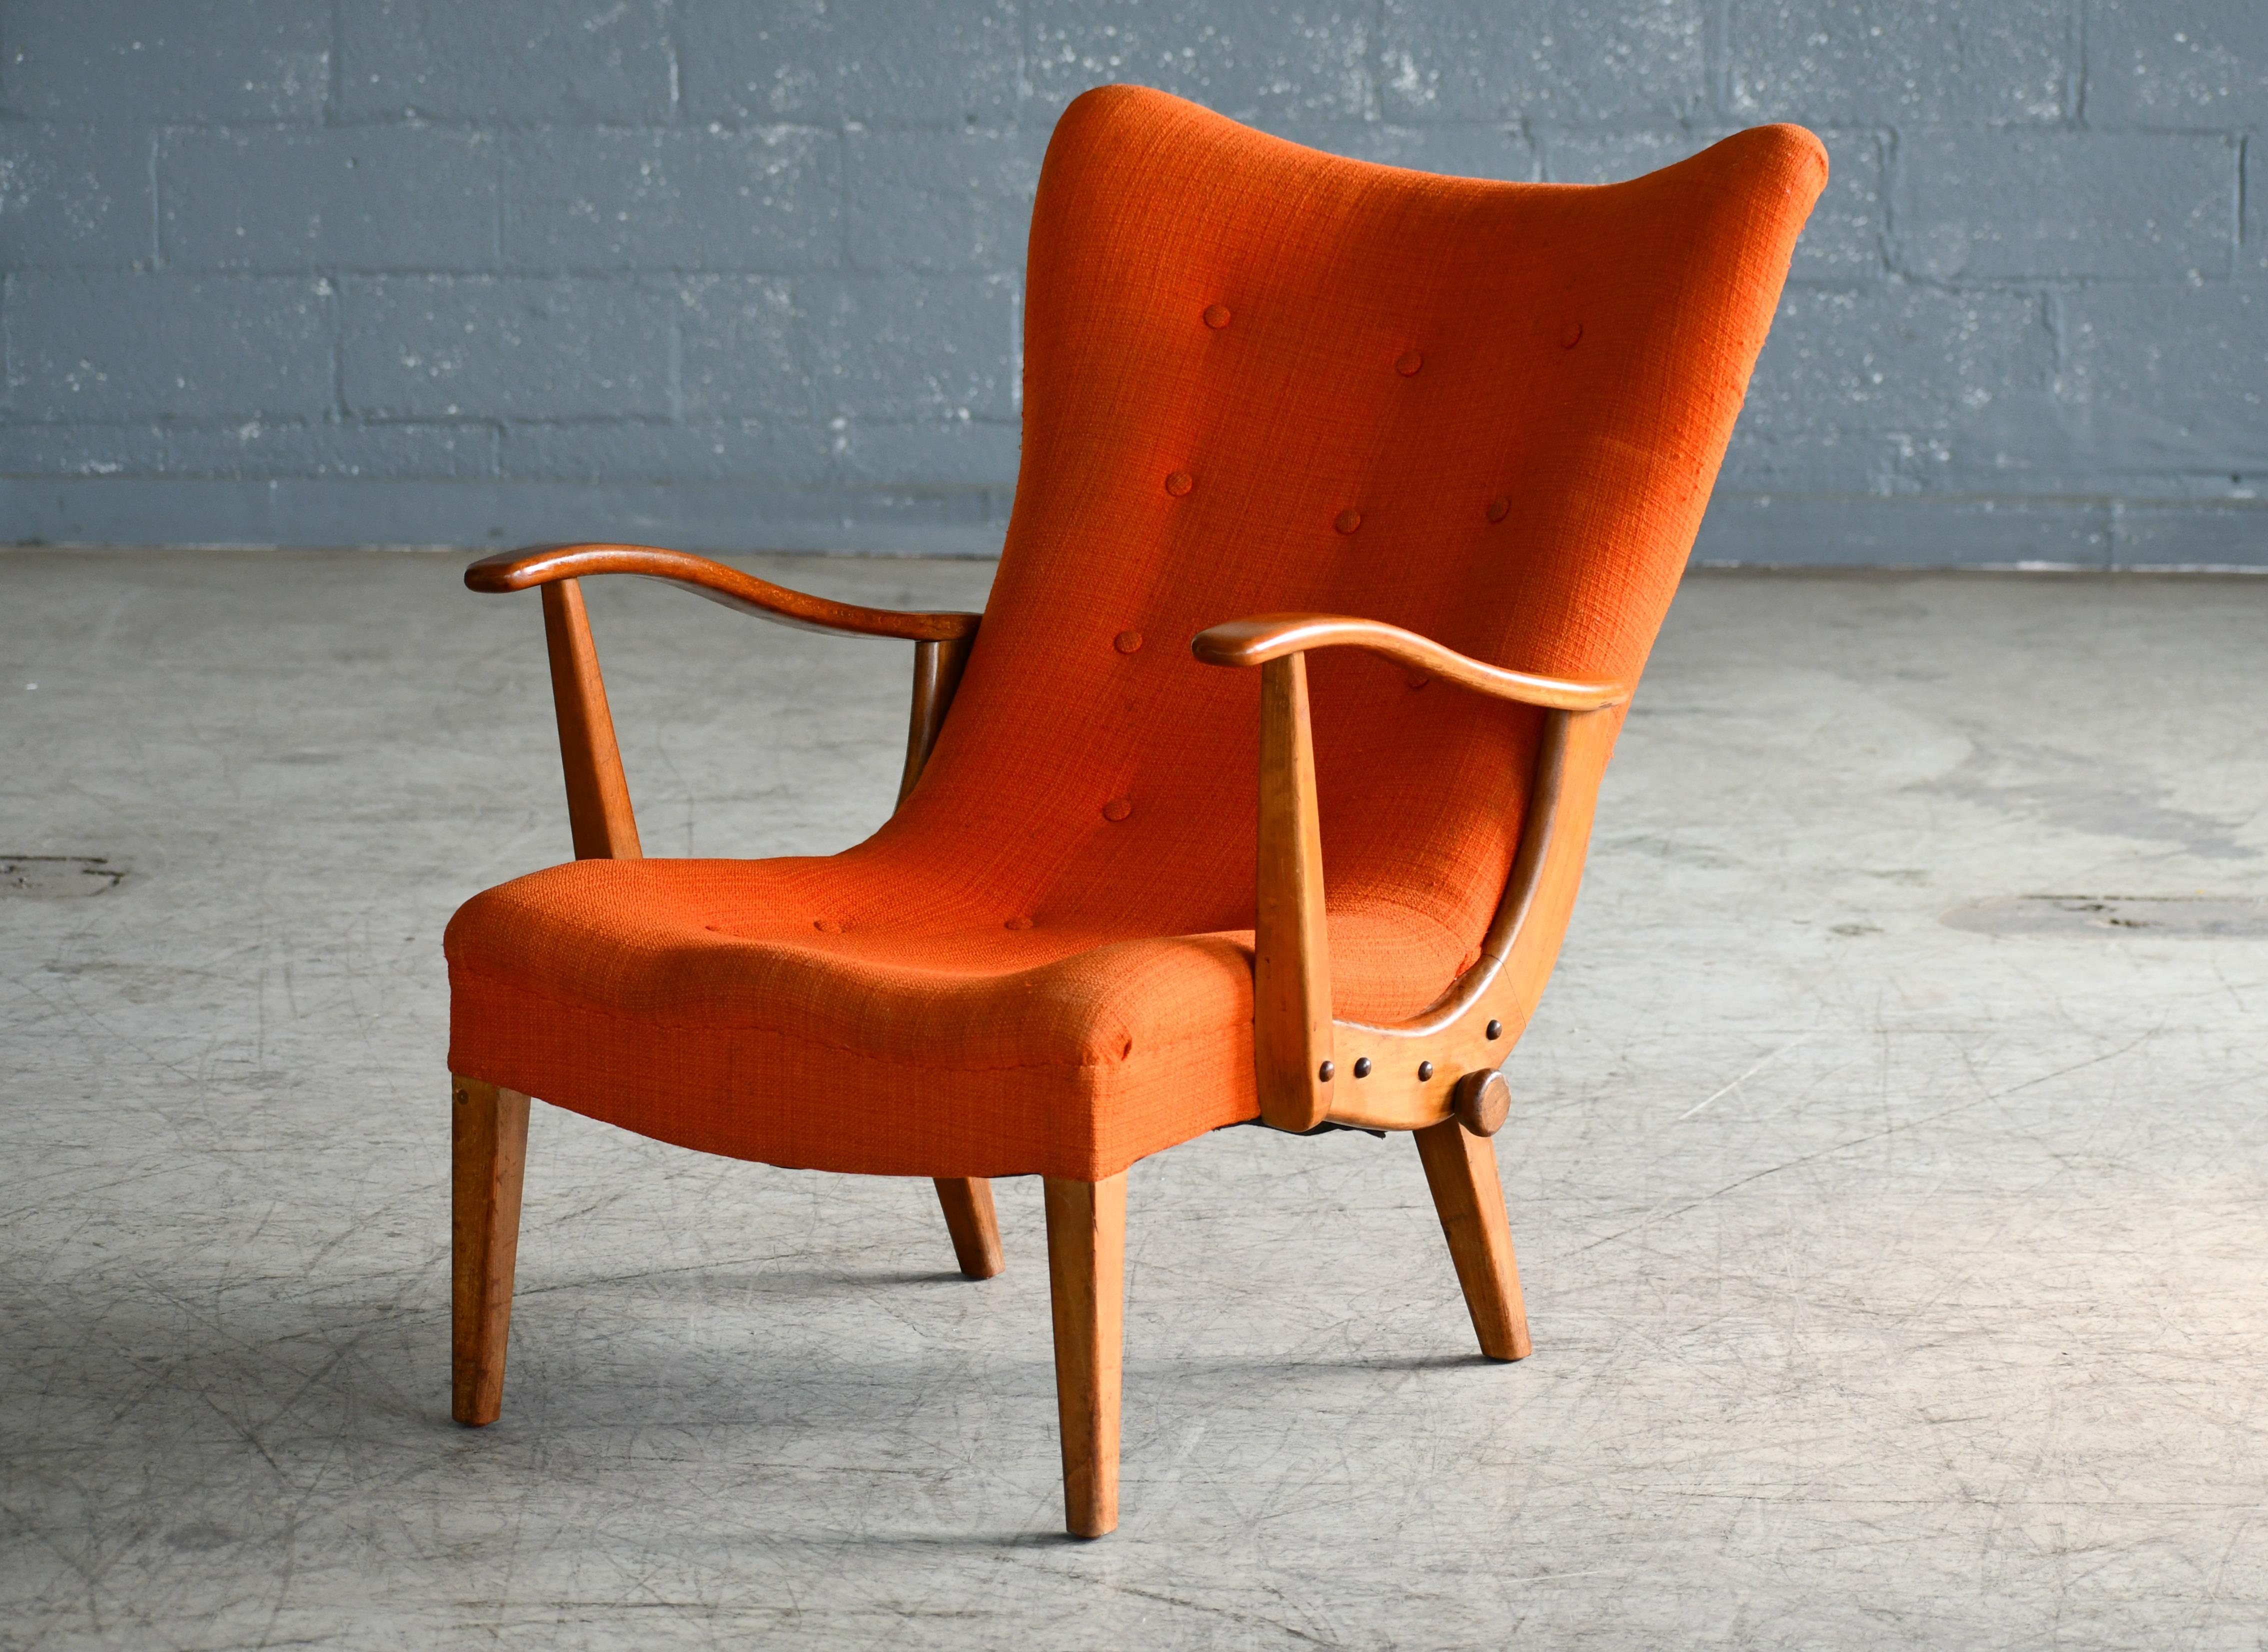 Rare and unusual reclining lounge chair made from beechwood - this example made approx. 1950s presumably by cabinetmaker Otto Færge. Otto færge was a cabinetmaker that also was his own retailer with a big store in central Copenhagen in the 1940s.